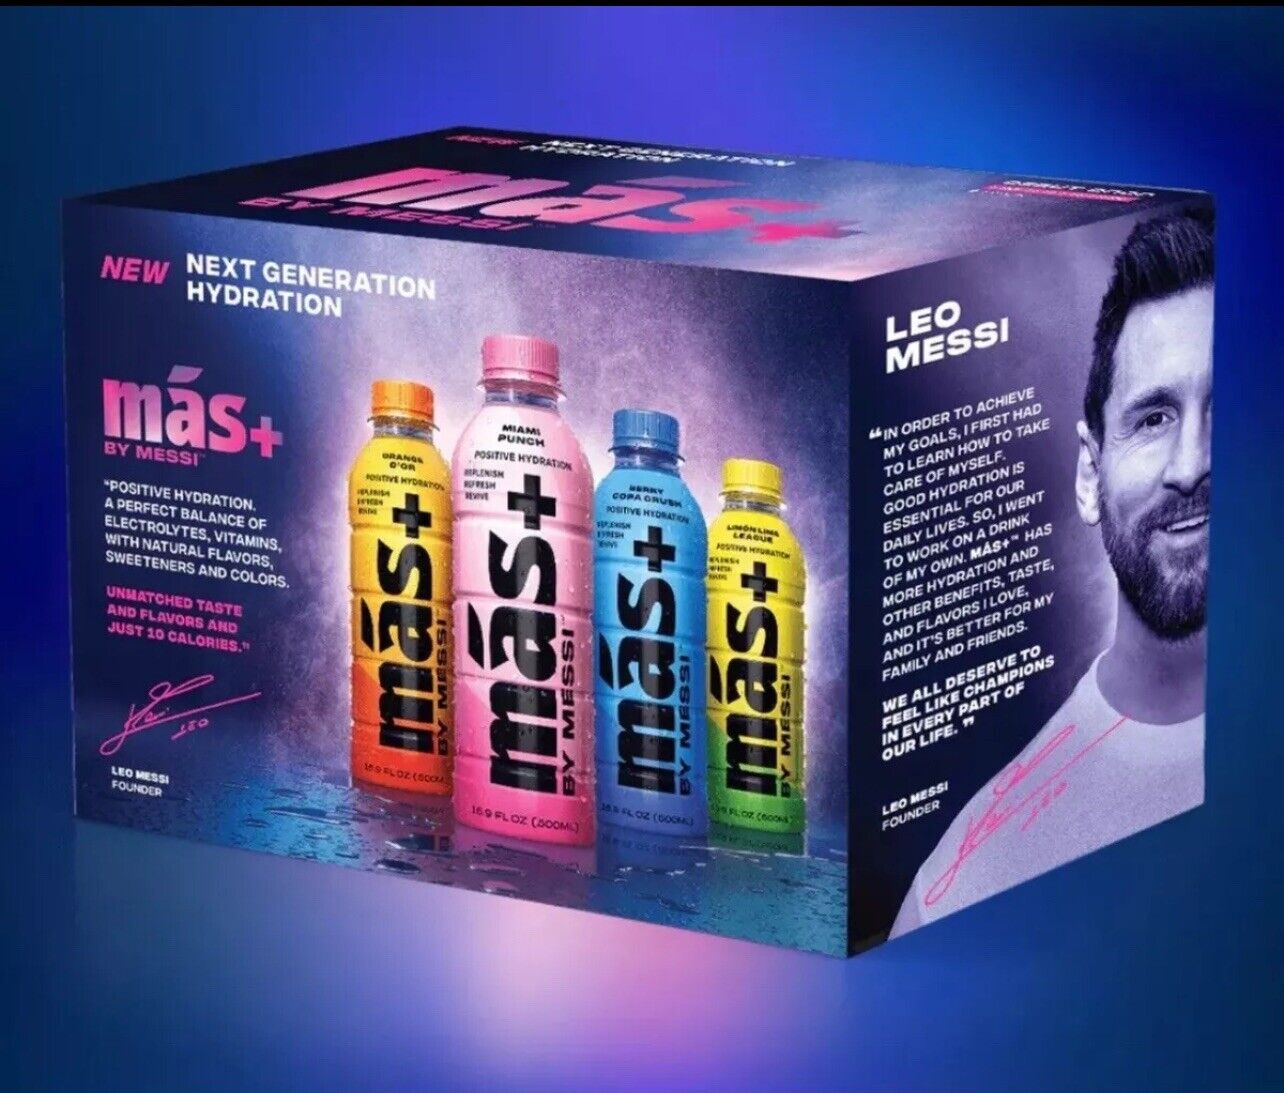 Más+ By Messi Commemorative Launch Pack Confirmed Order Limited Edition Drink